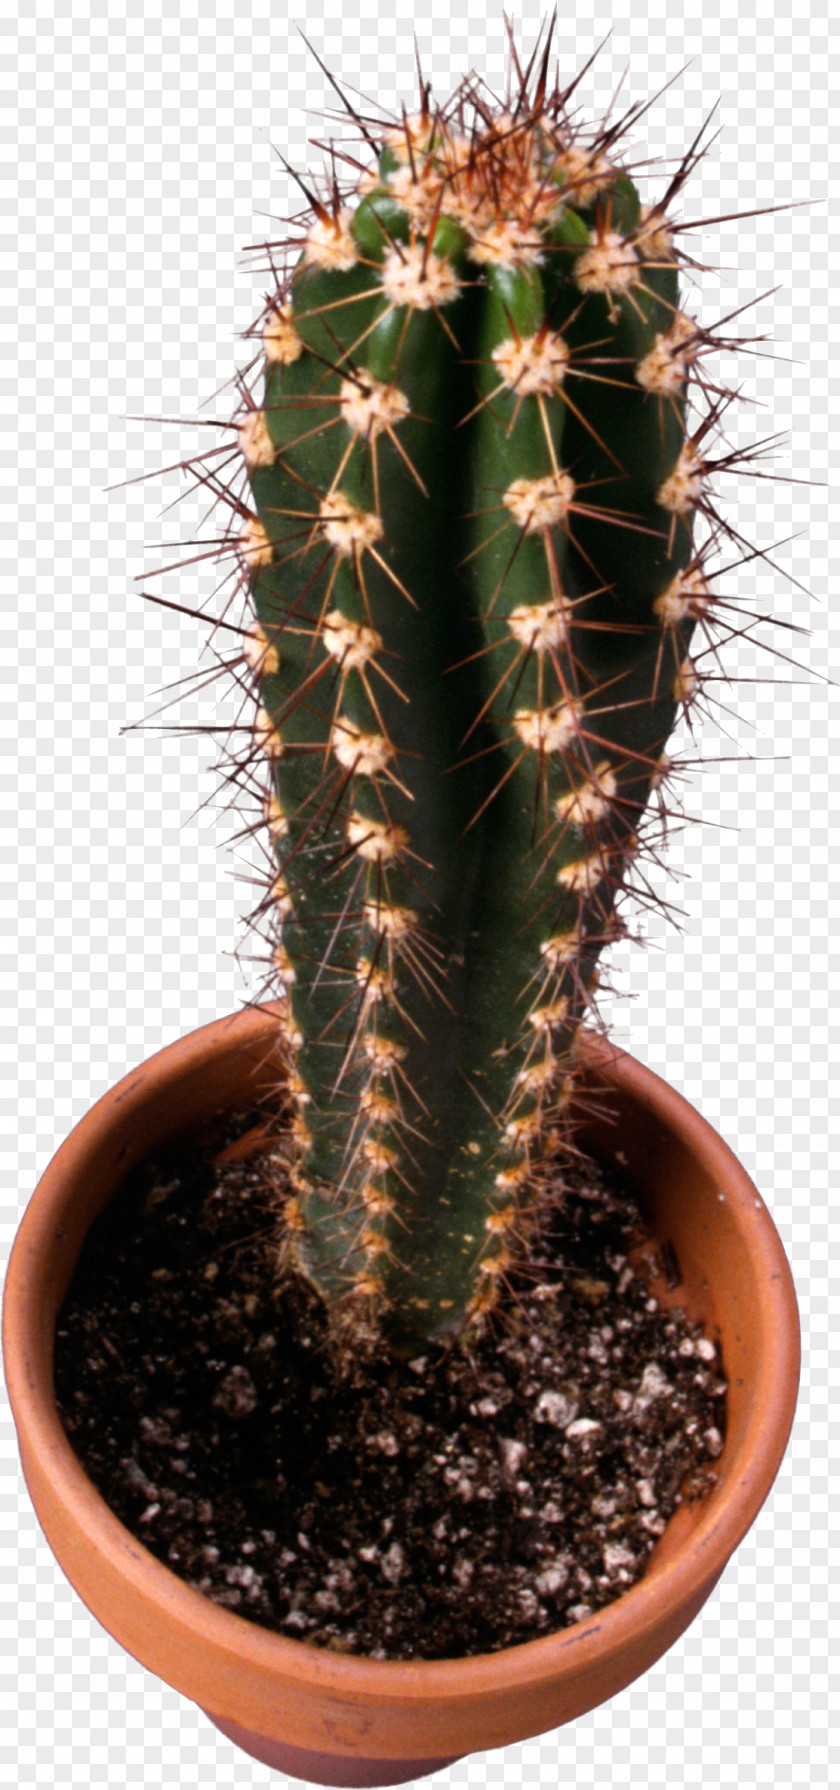 Cactus Image Cactaceae Mexican Cuisine Taqueria, Albany, CA Thorns, Spines, And Prickles Succulent Plant PNG